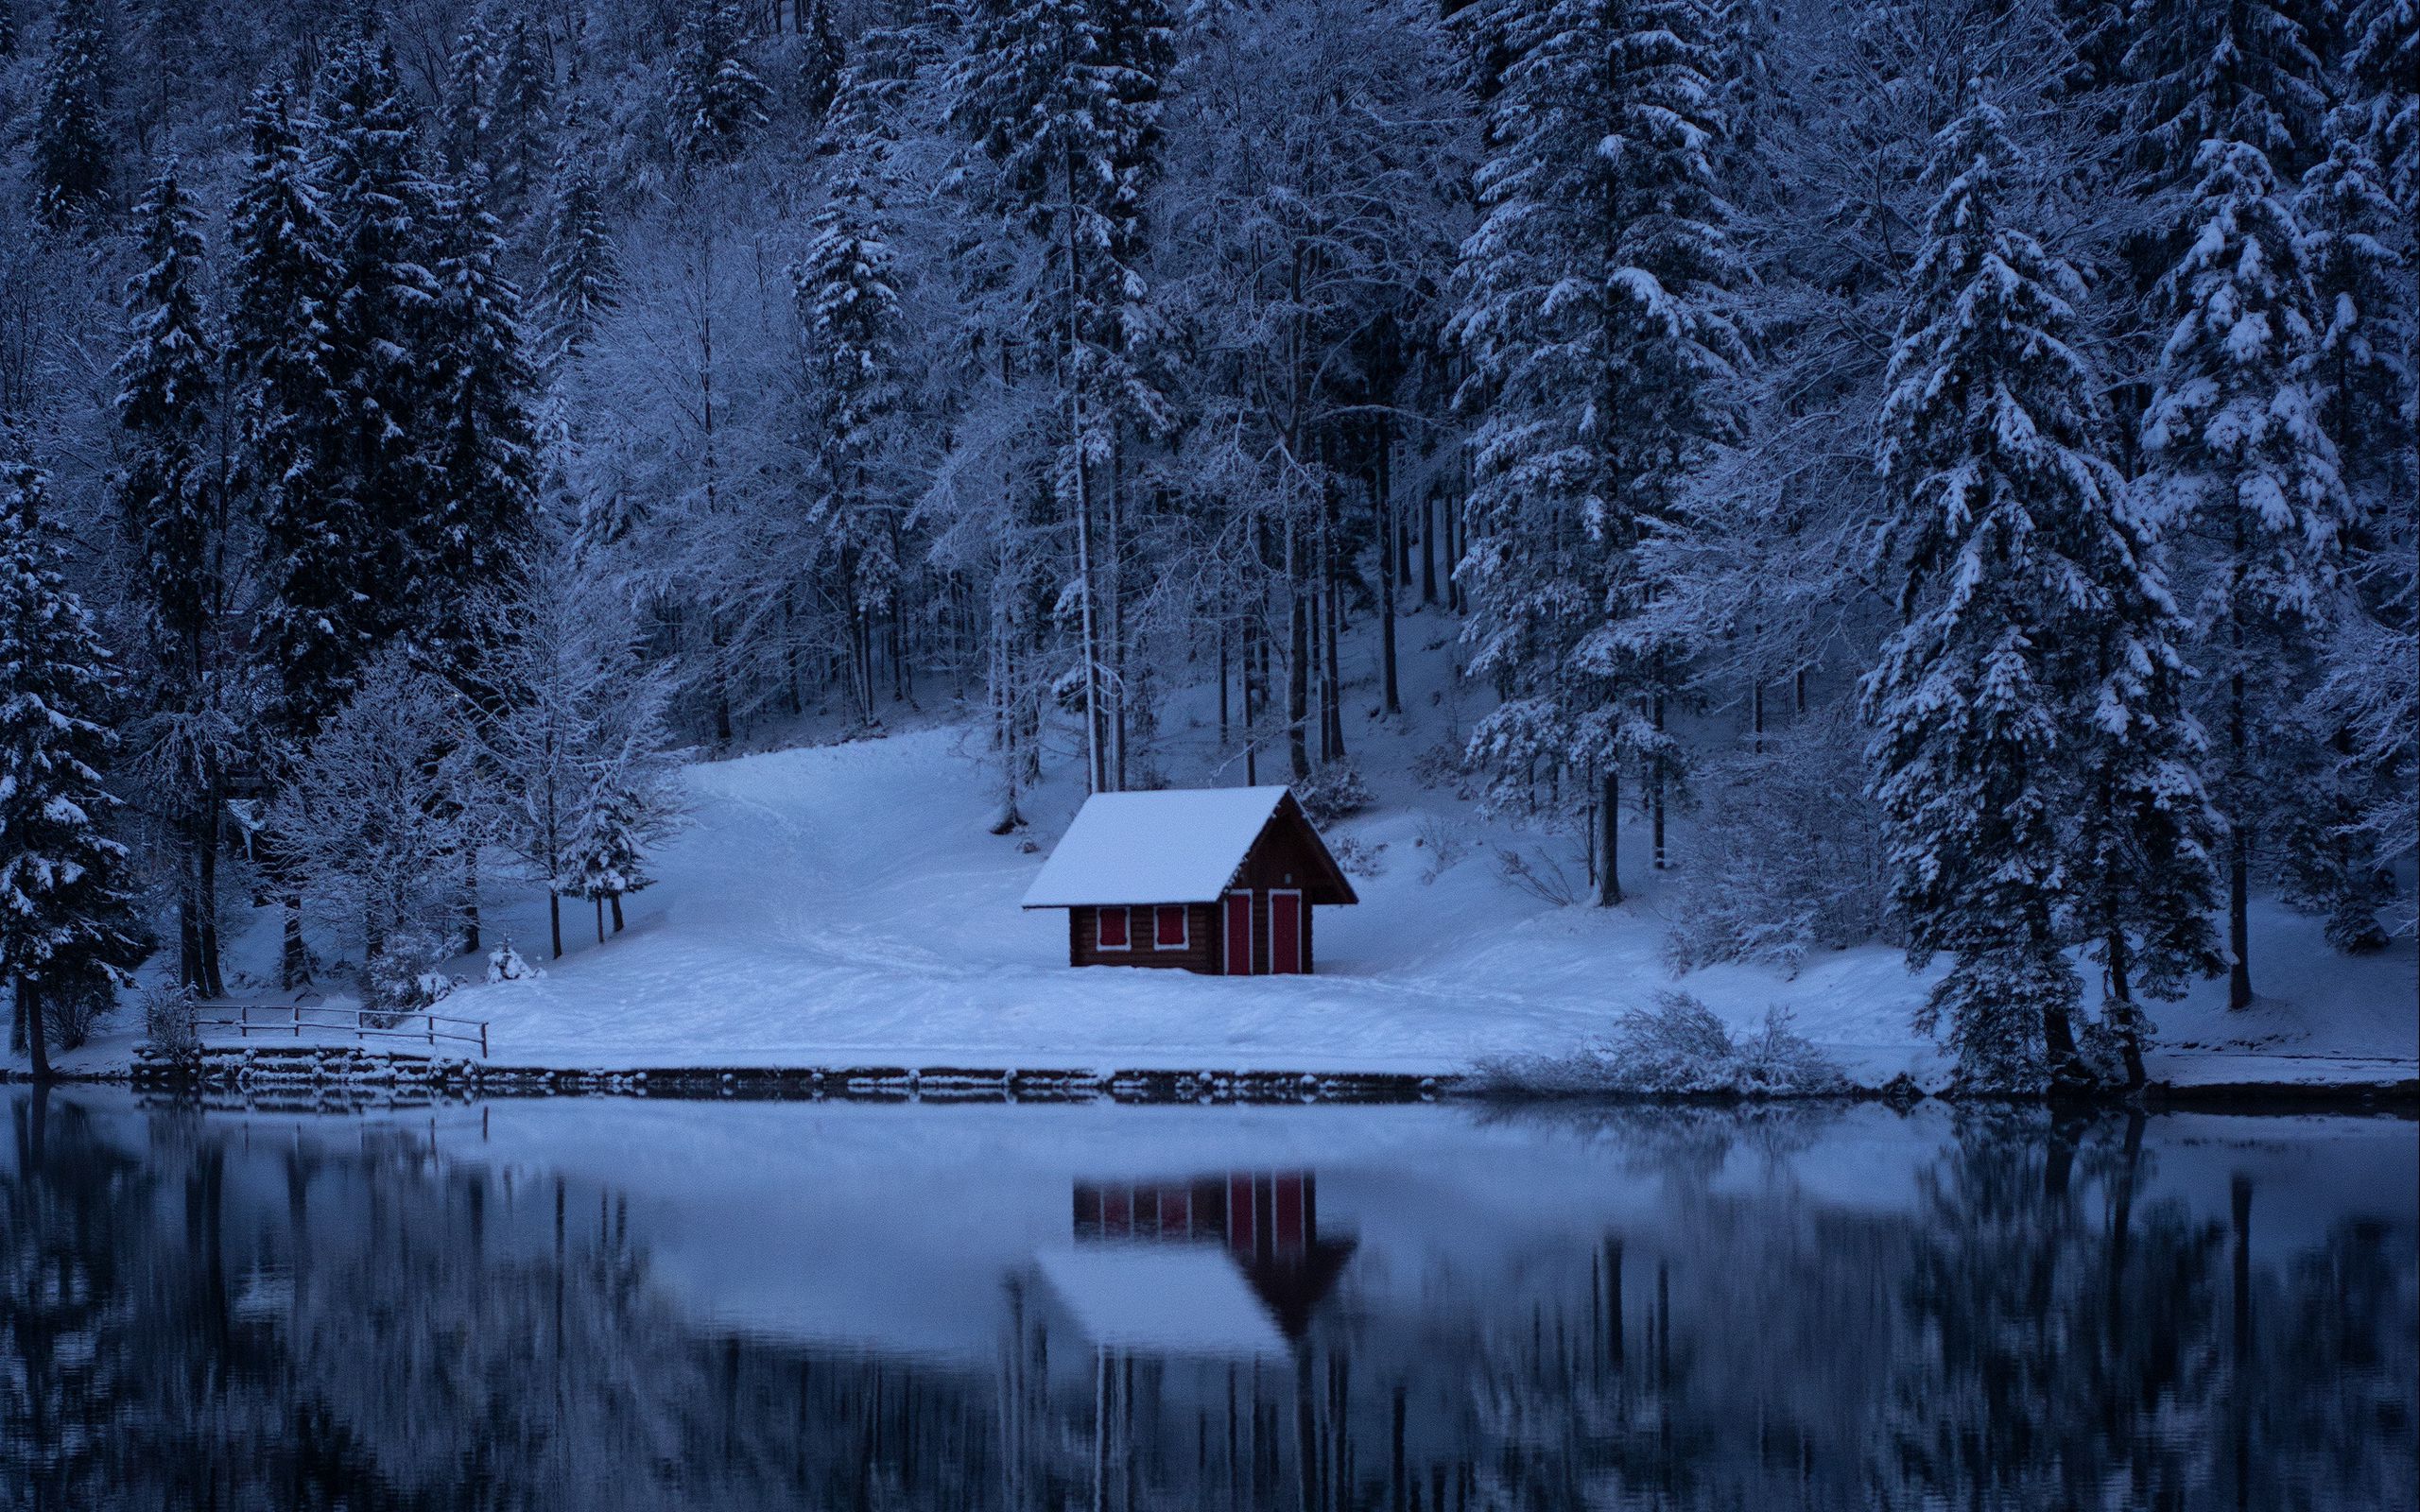 Download wallpaper 2560x1600 lake, forest, snow, winter, trees widescreen 16:10 HD background